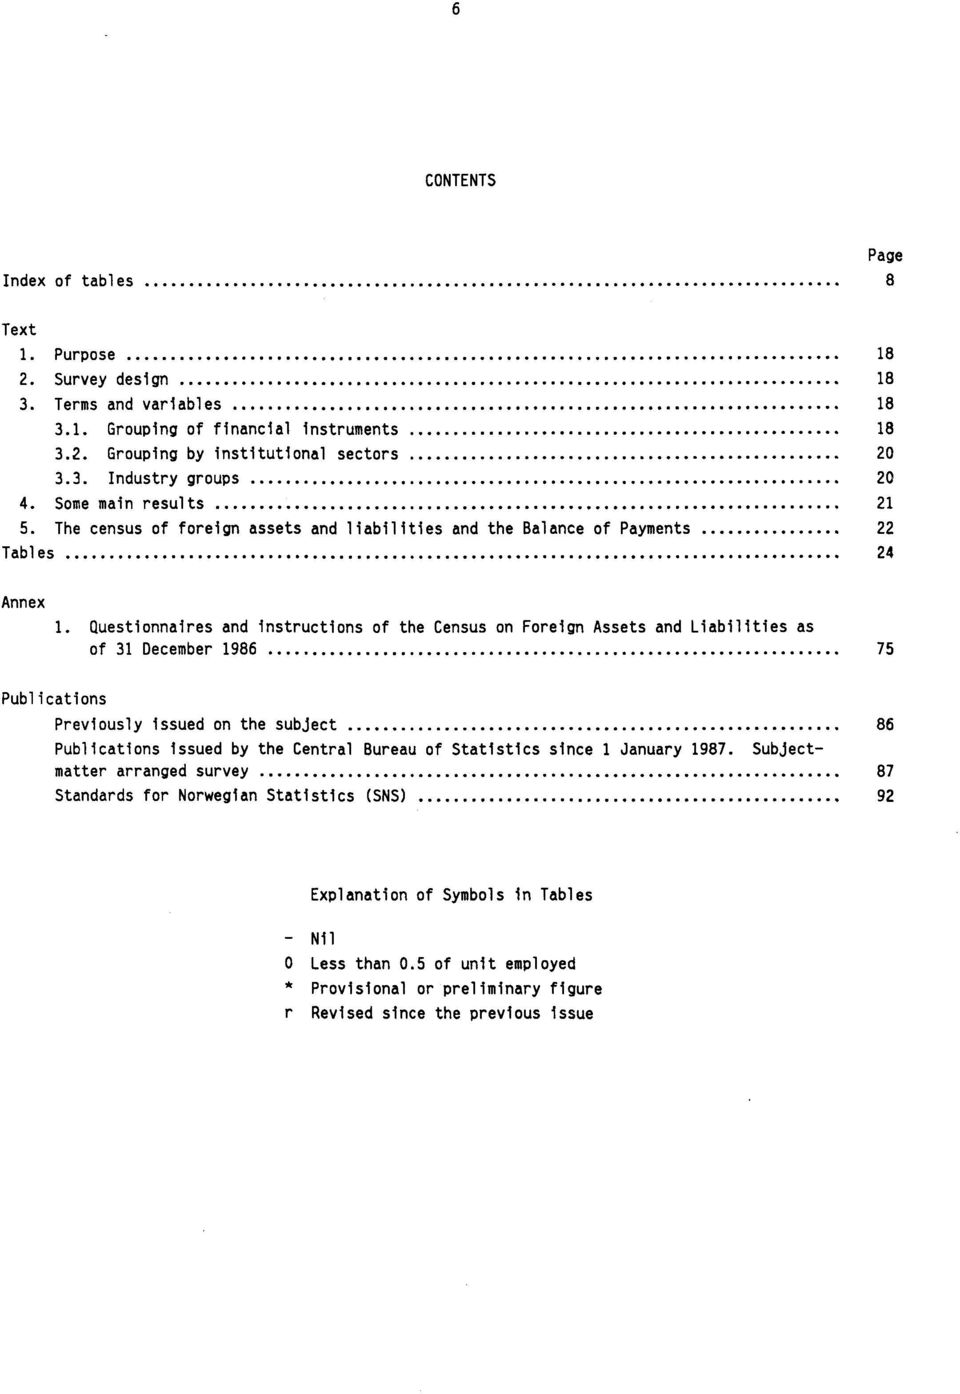 Questionnaires and instructions of the Census on Foreign Assets and Liabilities as of 31 December 1986 75 Publications Previously issued on the subject 86 Publications issued by the Central